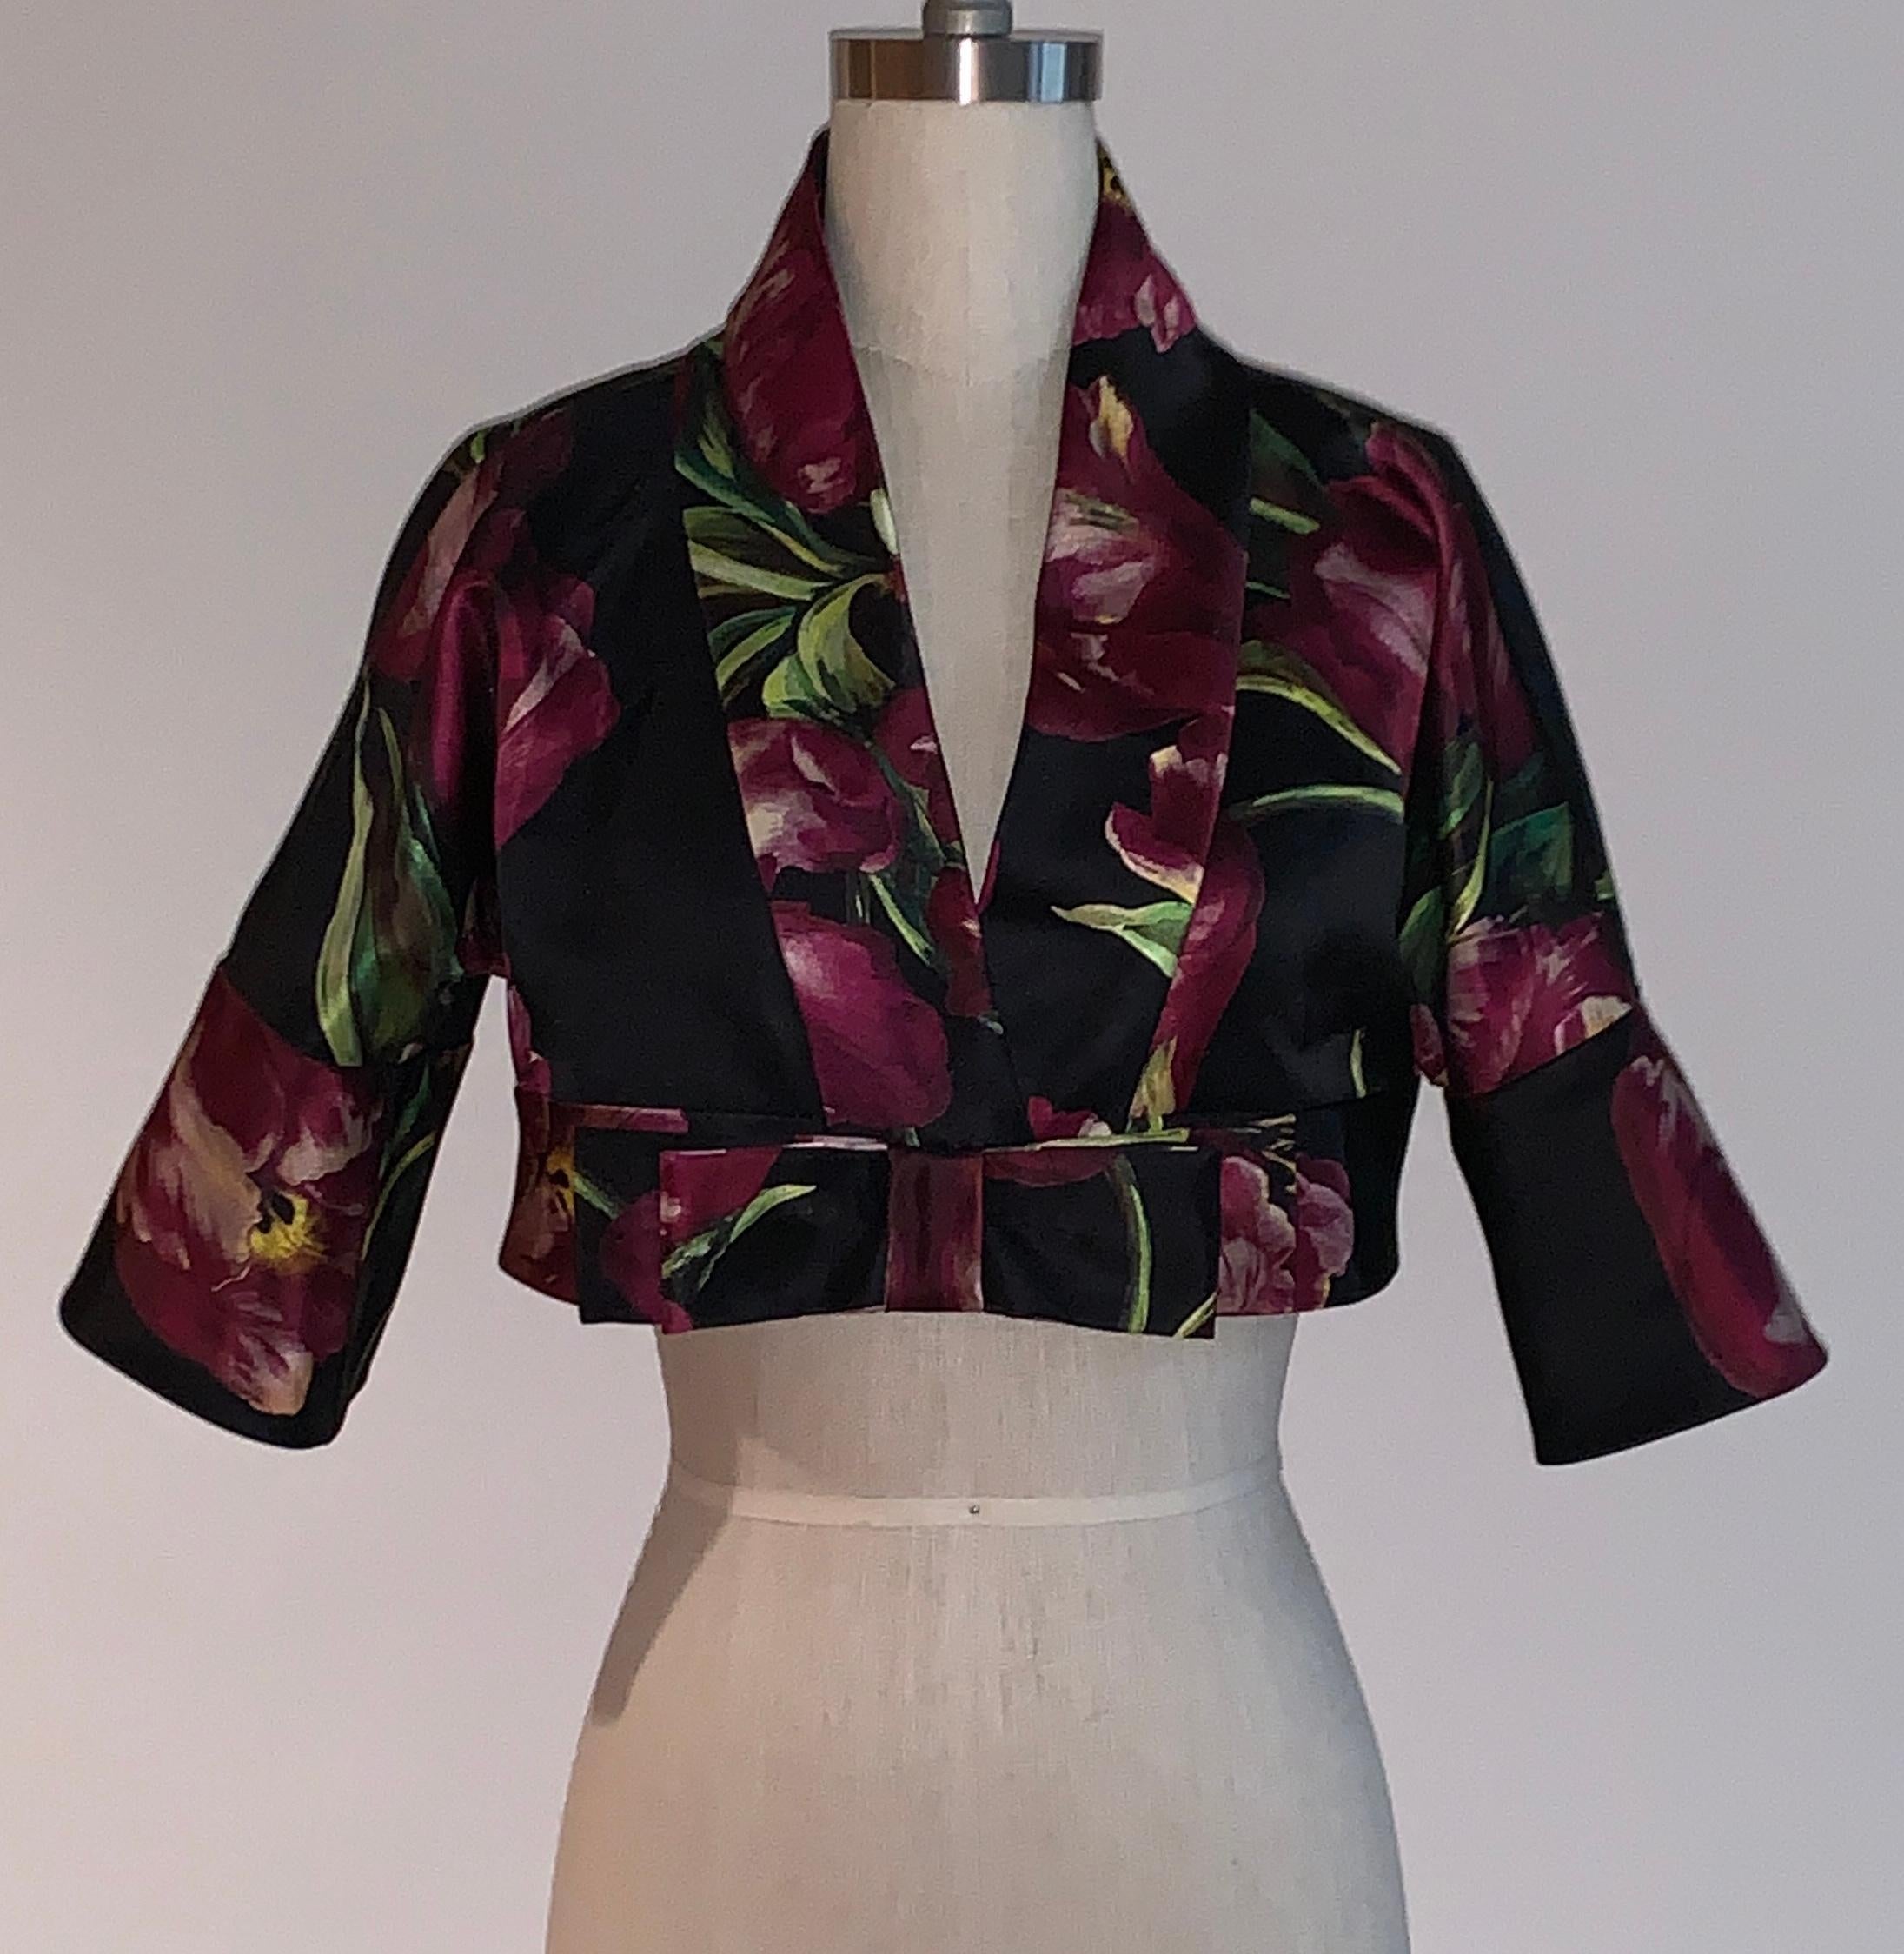 Dolce & Gabbana black and purplish floral tulip print silk cropped bolero with bow detail at front, wide sleeves. Fastens at front with two hidden snap closures. 

100% silk.
Lined in 100% silk.

Made in Italy.

Size IT 38, approximate US 2. See